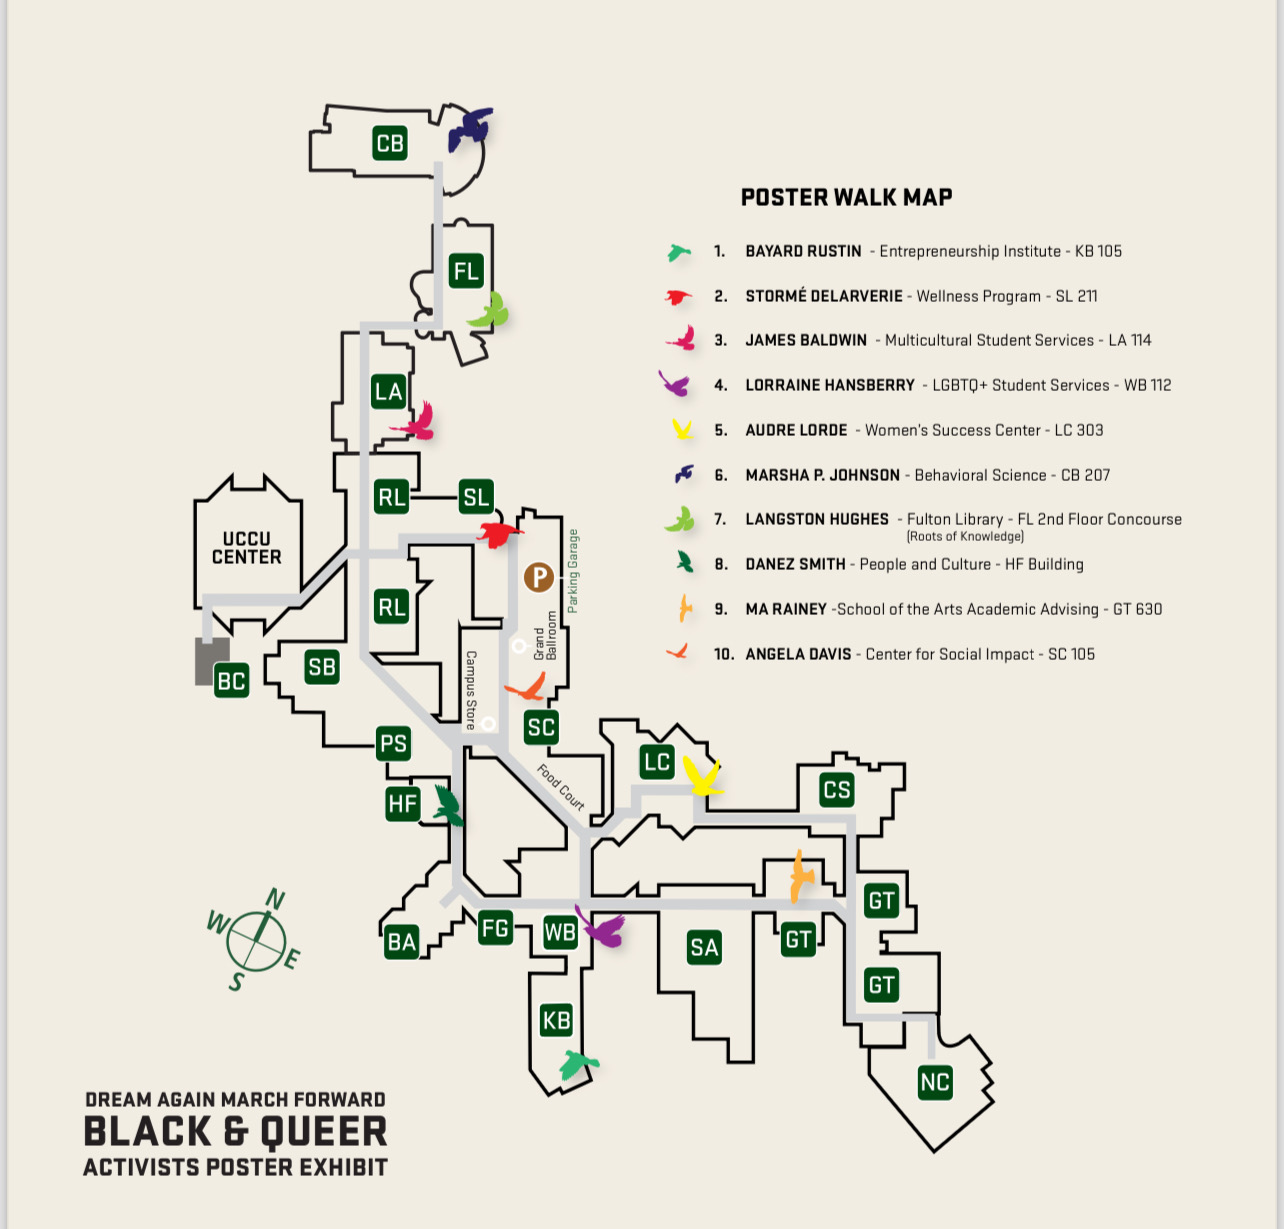 map of LGBTQ poster locations across campus